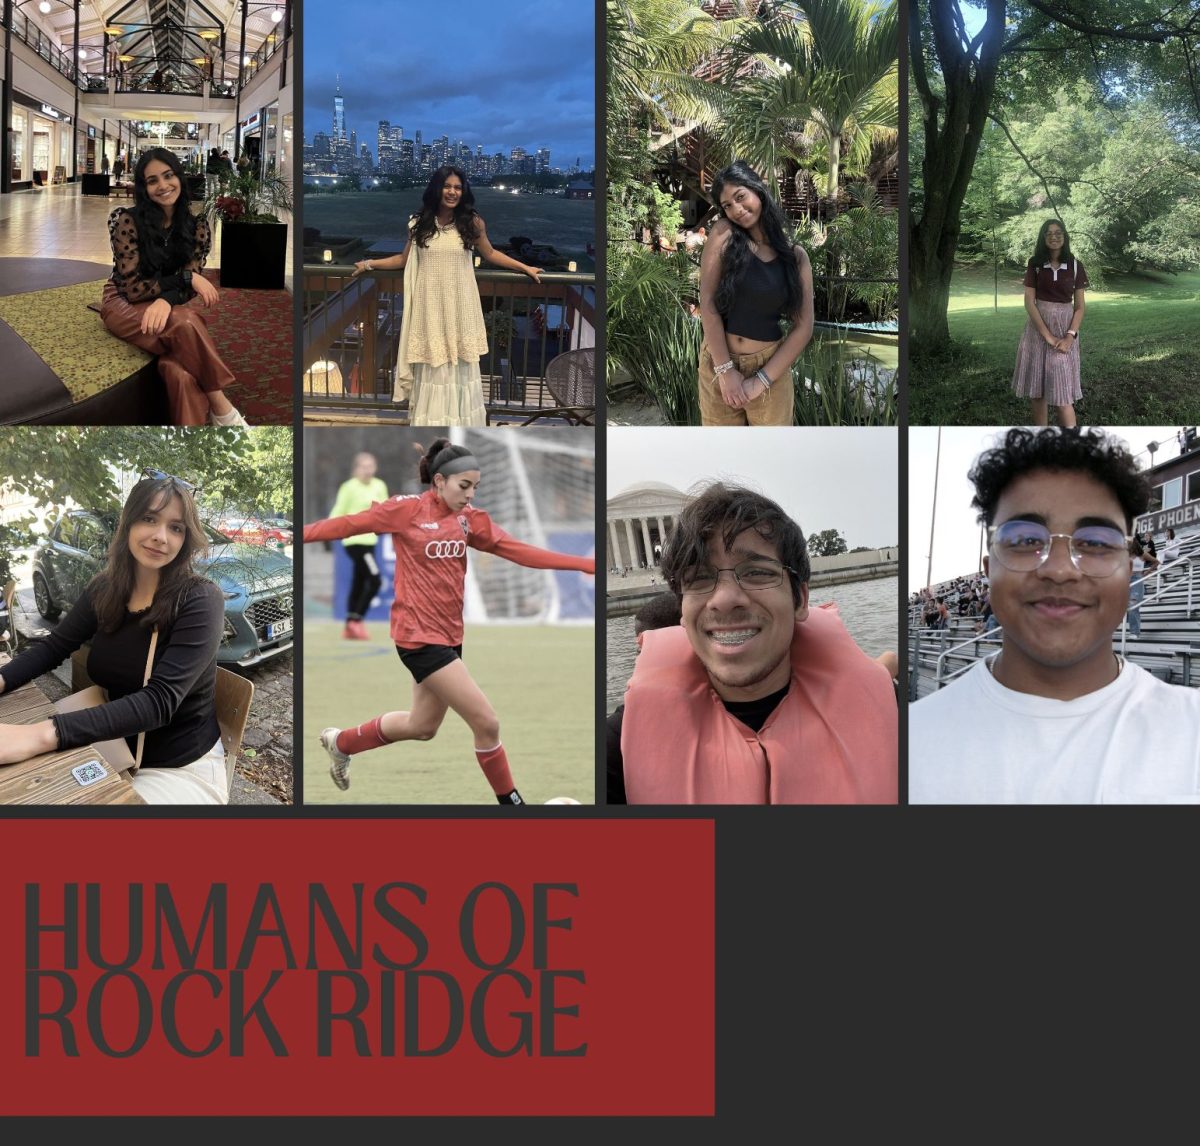 From the athletes to the academics, student backgrounds shine through in all aspects, highlighting the niche hobbies and lifestyles of the Phoenix student body. Graphic by: Tanishka Enugu and Aarohi Motwani.